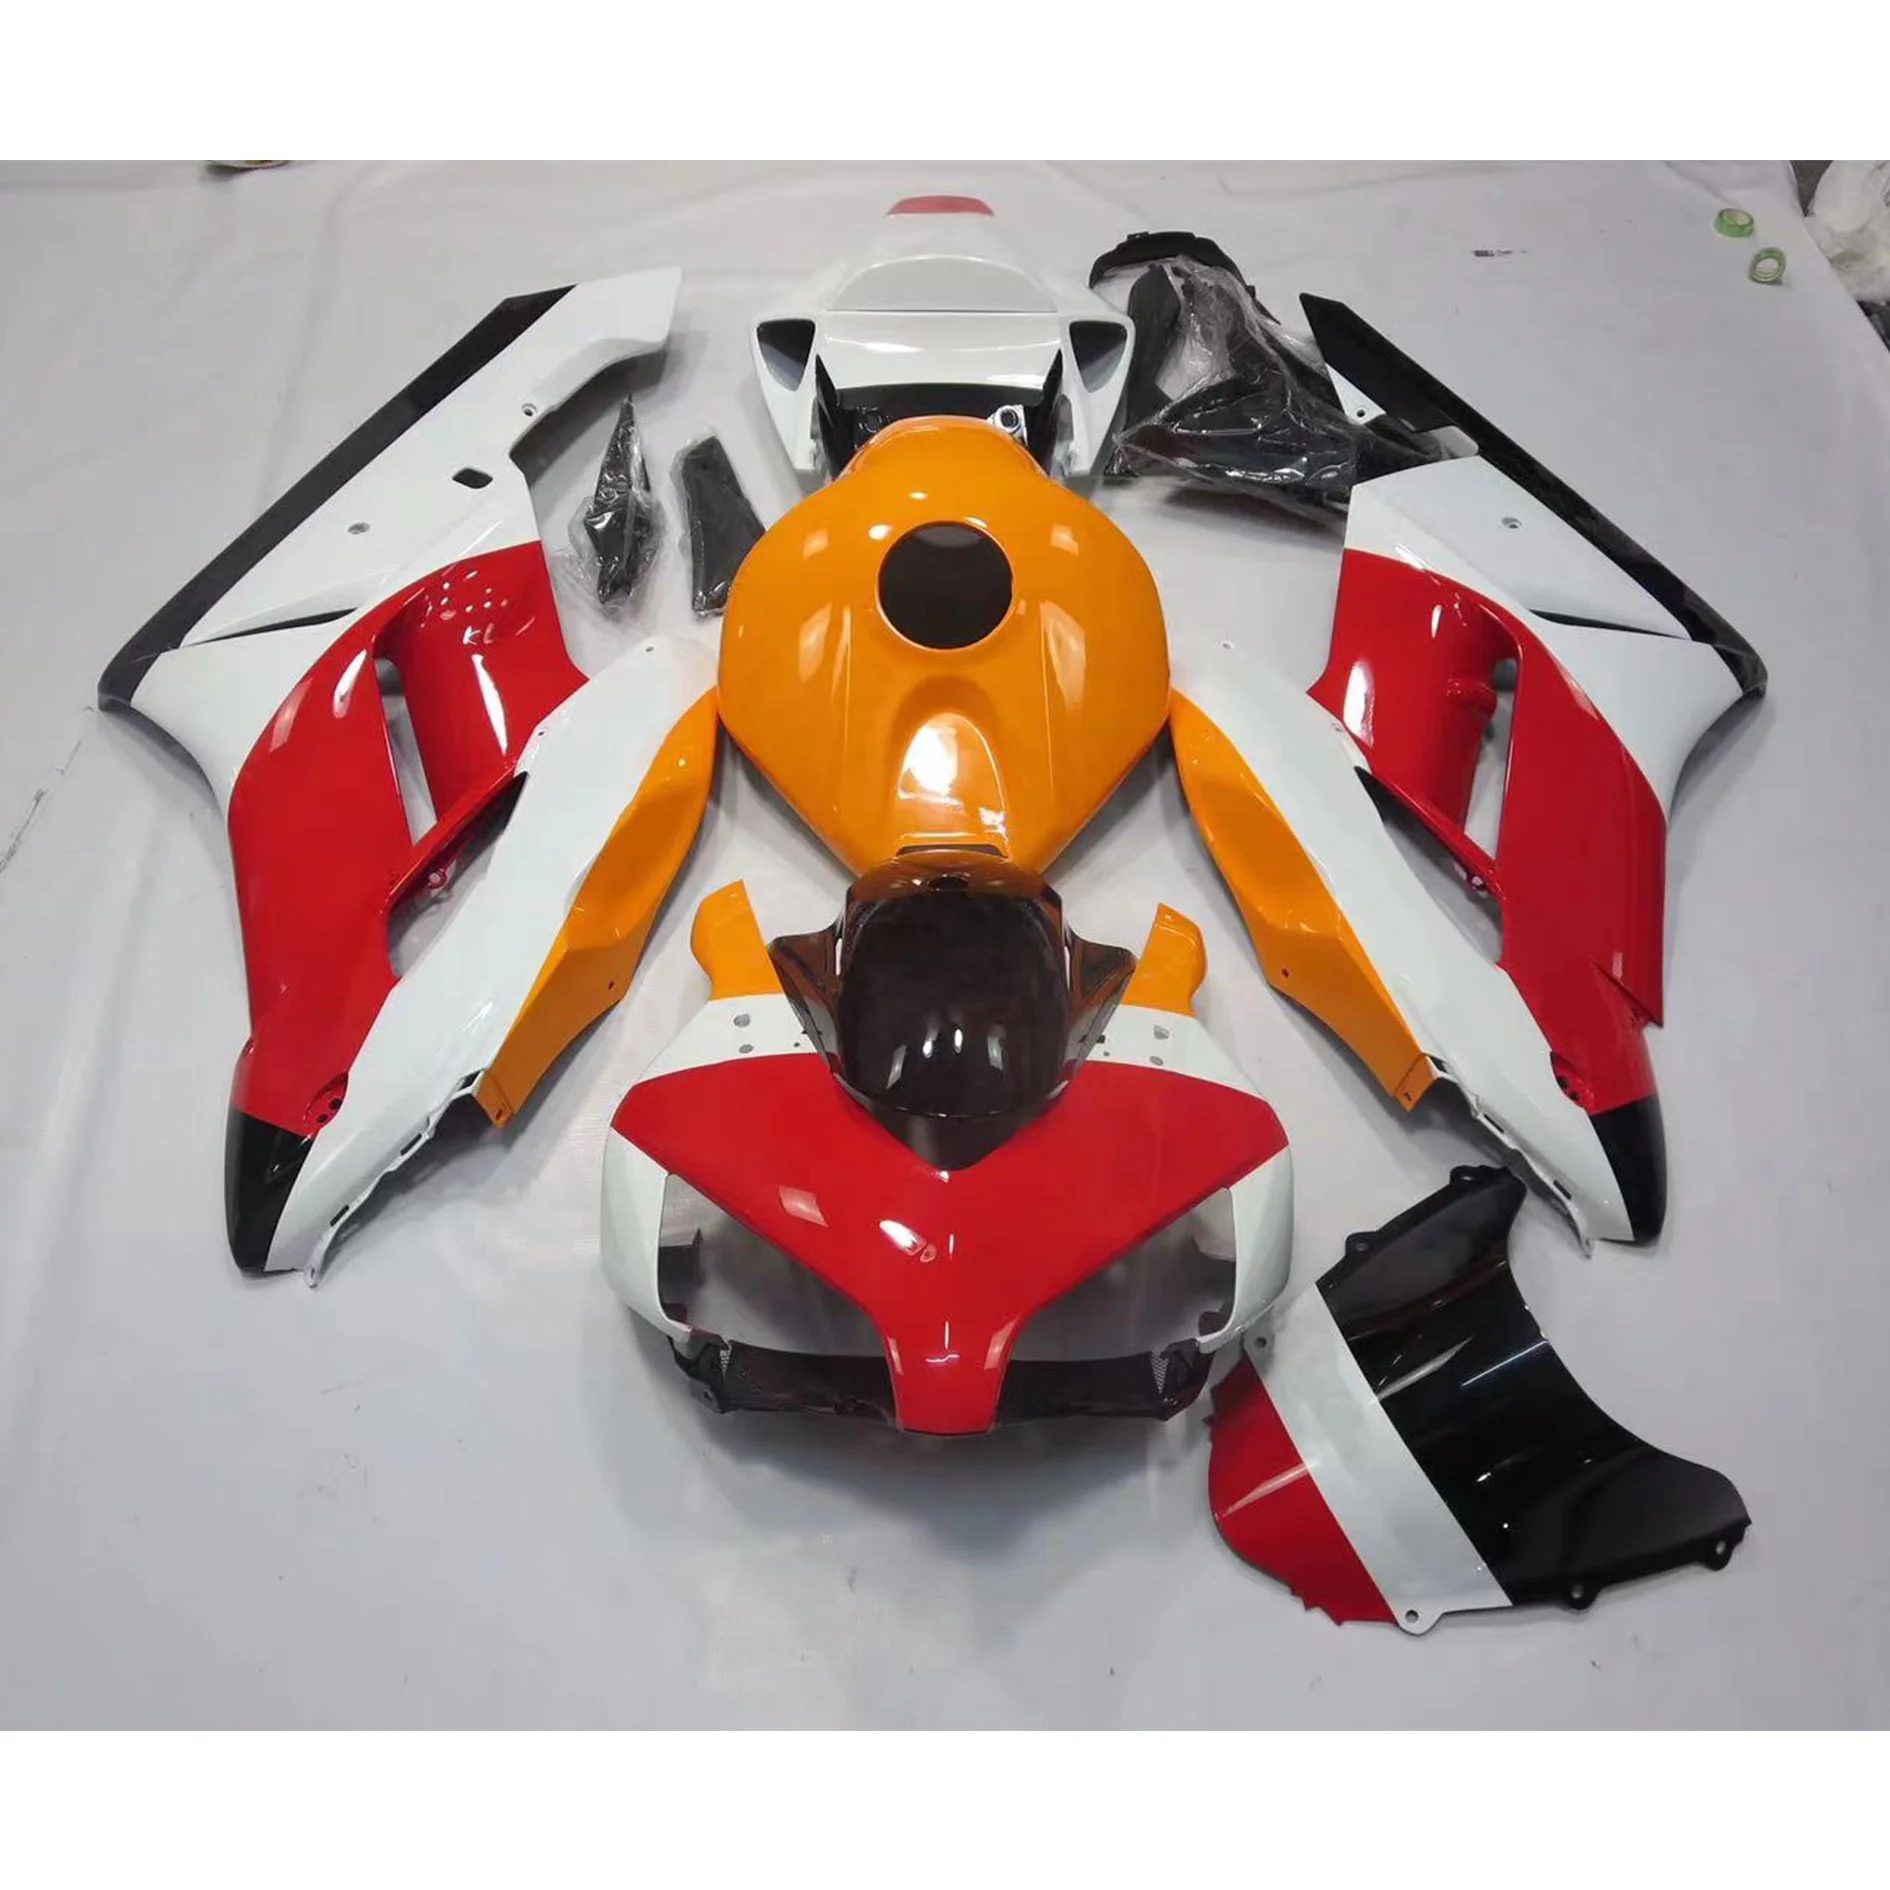 

2022 WHSC Red And Orange OEM Motorcycle Accessories For HONDA CBR1000RR 2004-2005 04 05 Motorcycle Body Systems Fairing Kits, Pictures shown